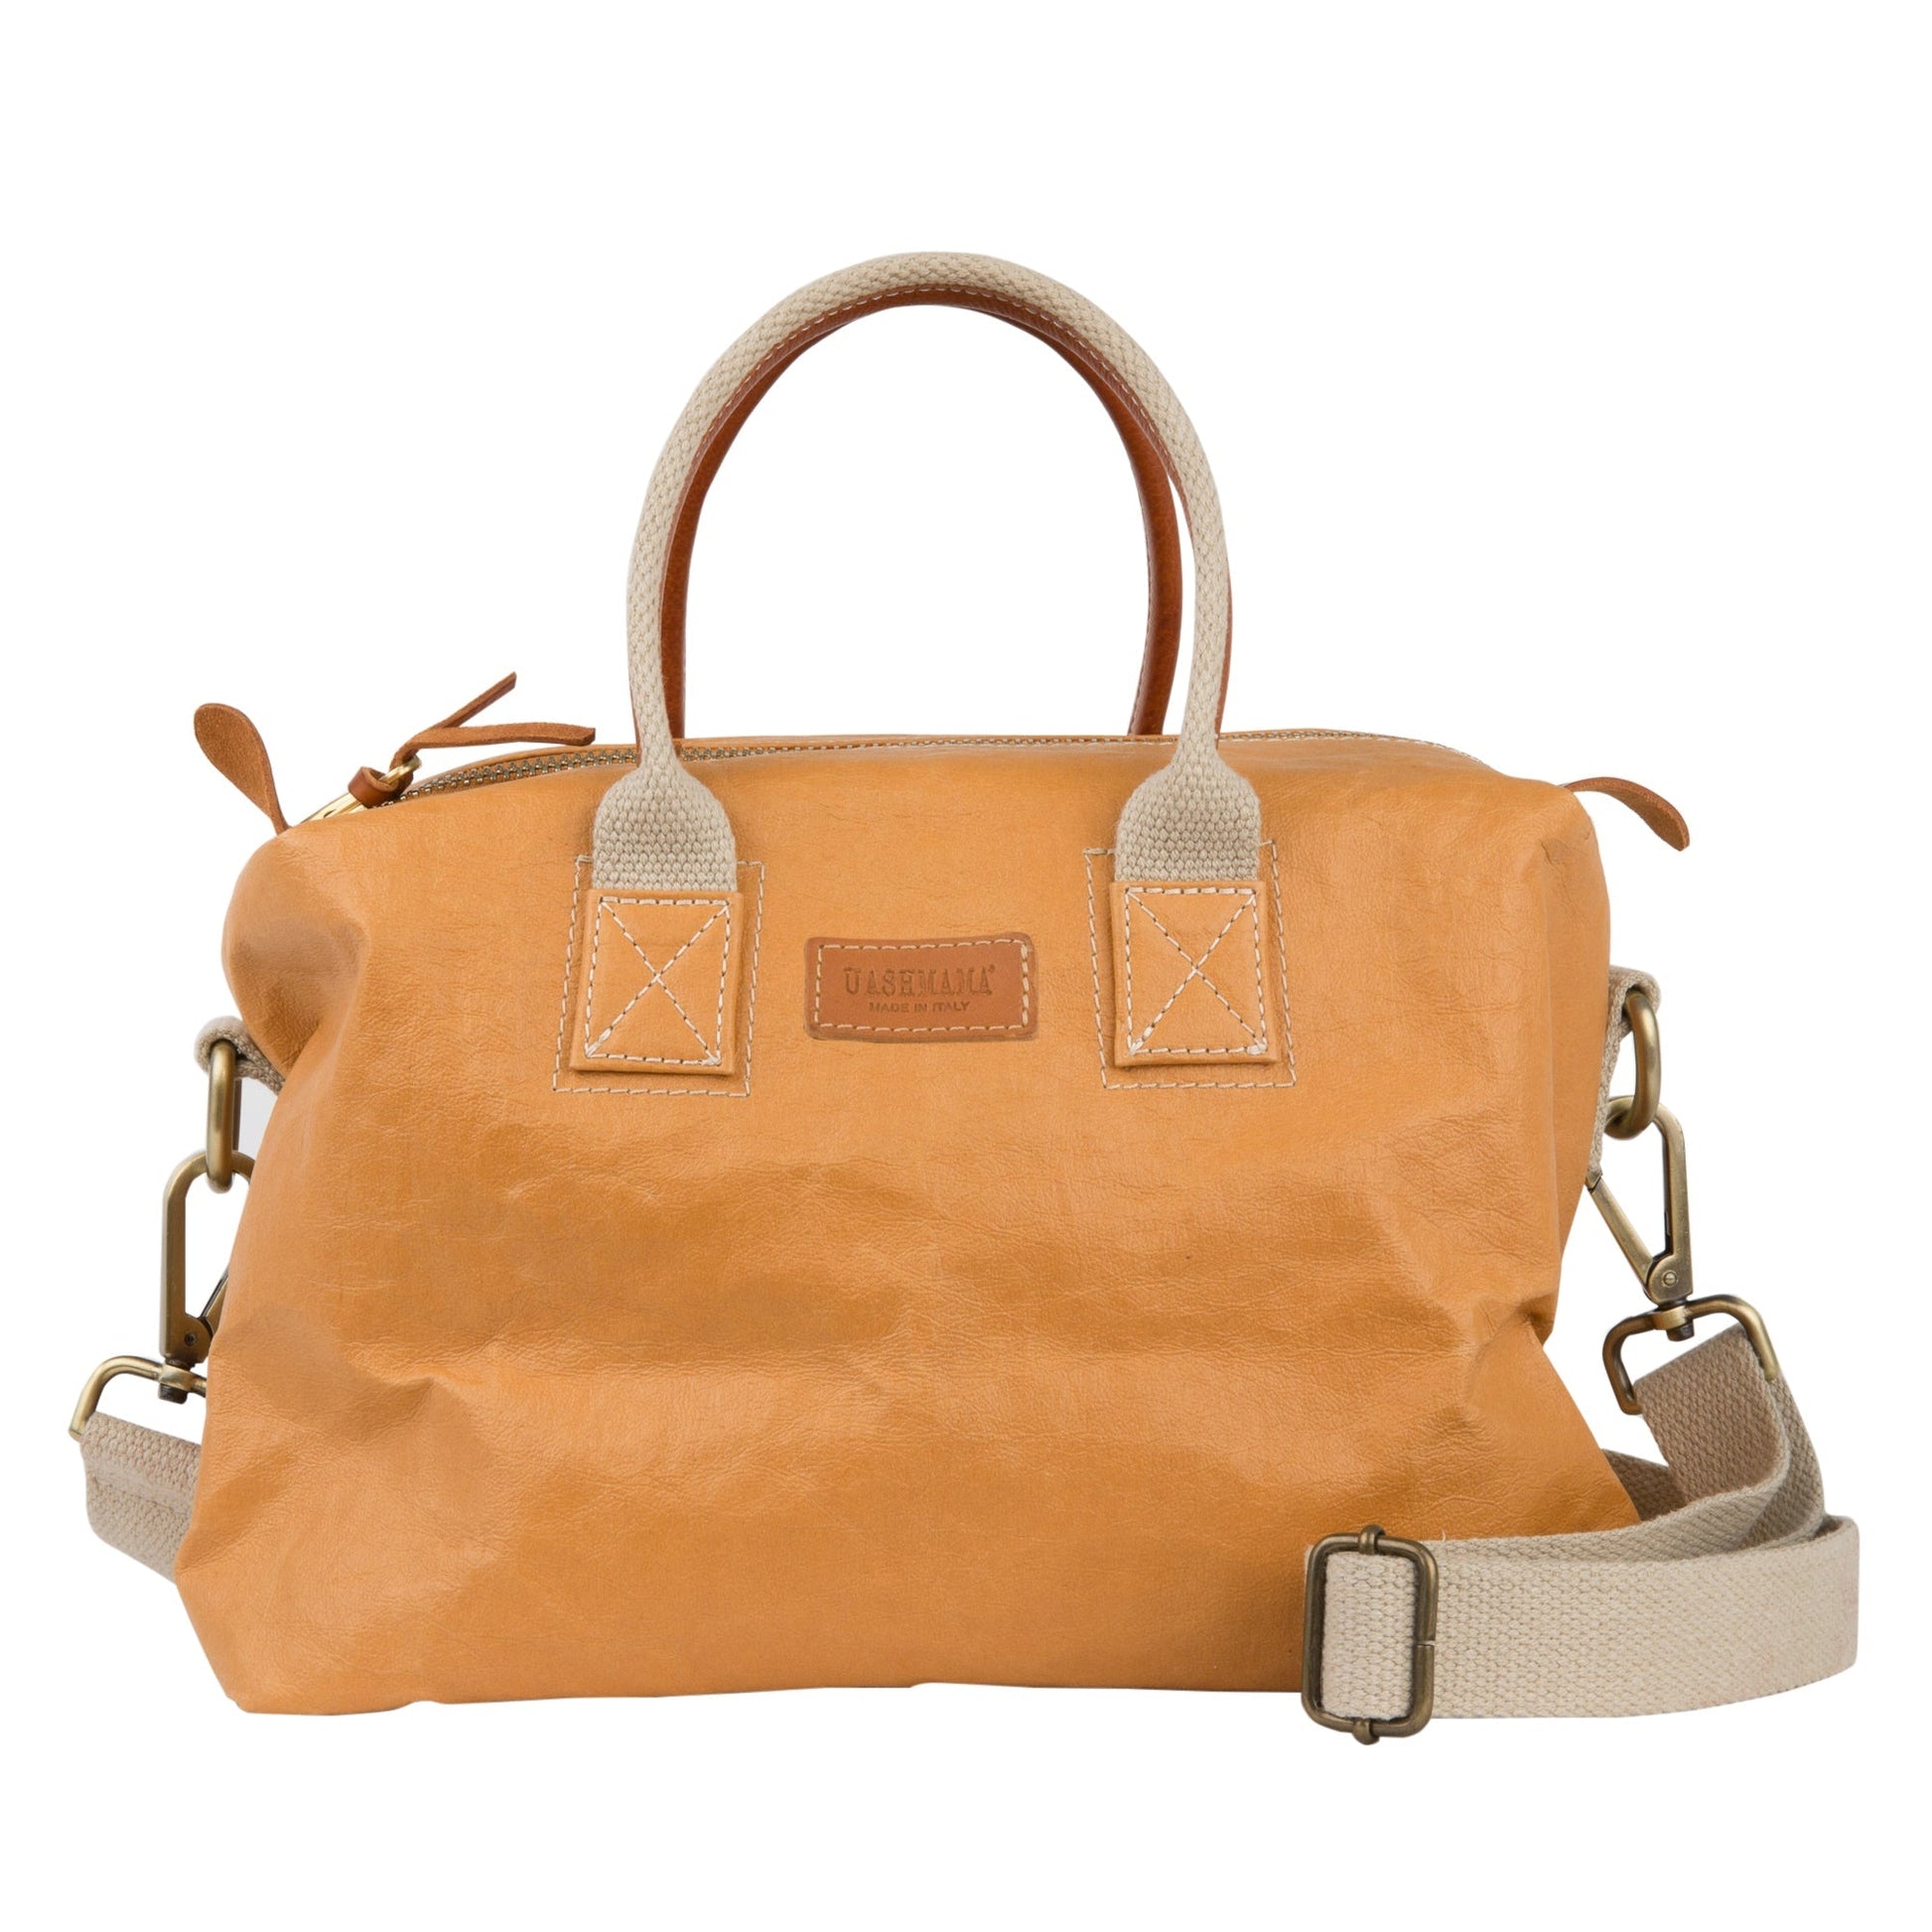 A washable paper holdall with two short carry handles and one long recycled cotton strap. The holdall closes with a zip which has leather zip pulls. The holdall has leather details attaching the straps to the bag and a small UASHMAMA leather logo label. The bag shown is tan with tan leather details. The holdall is the small size.